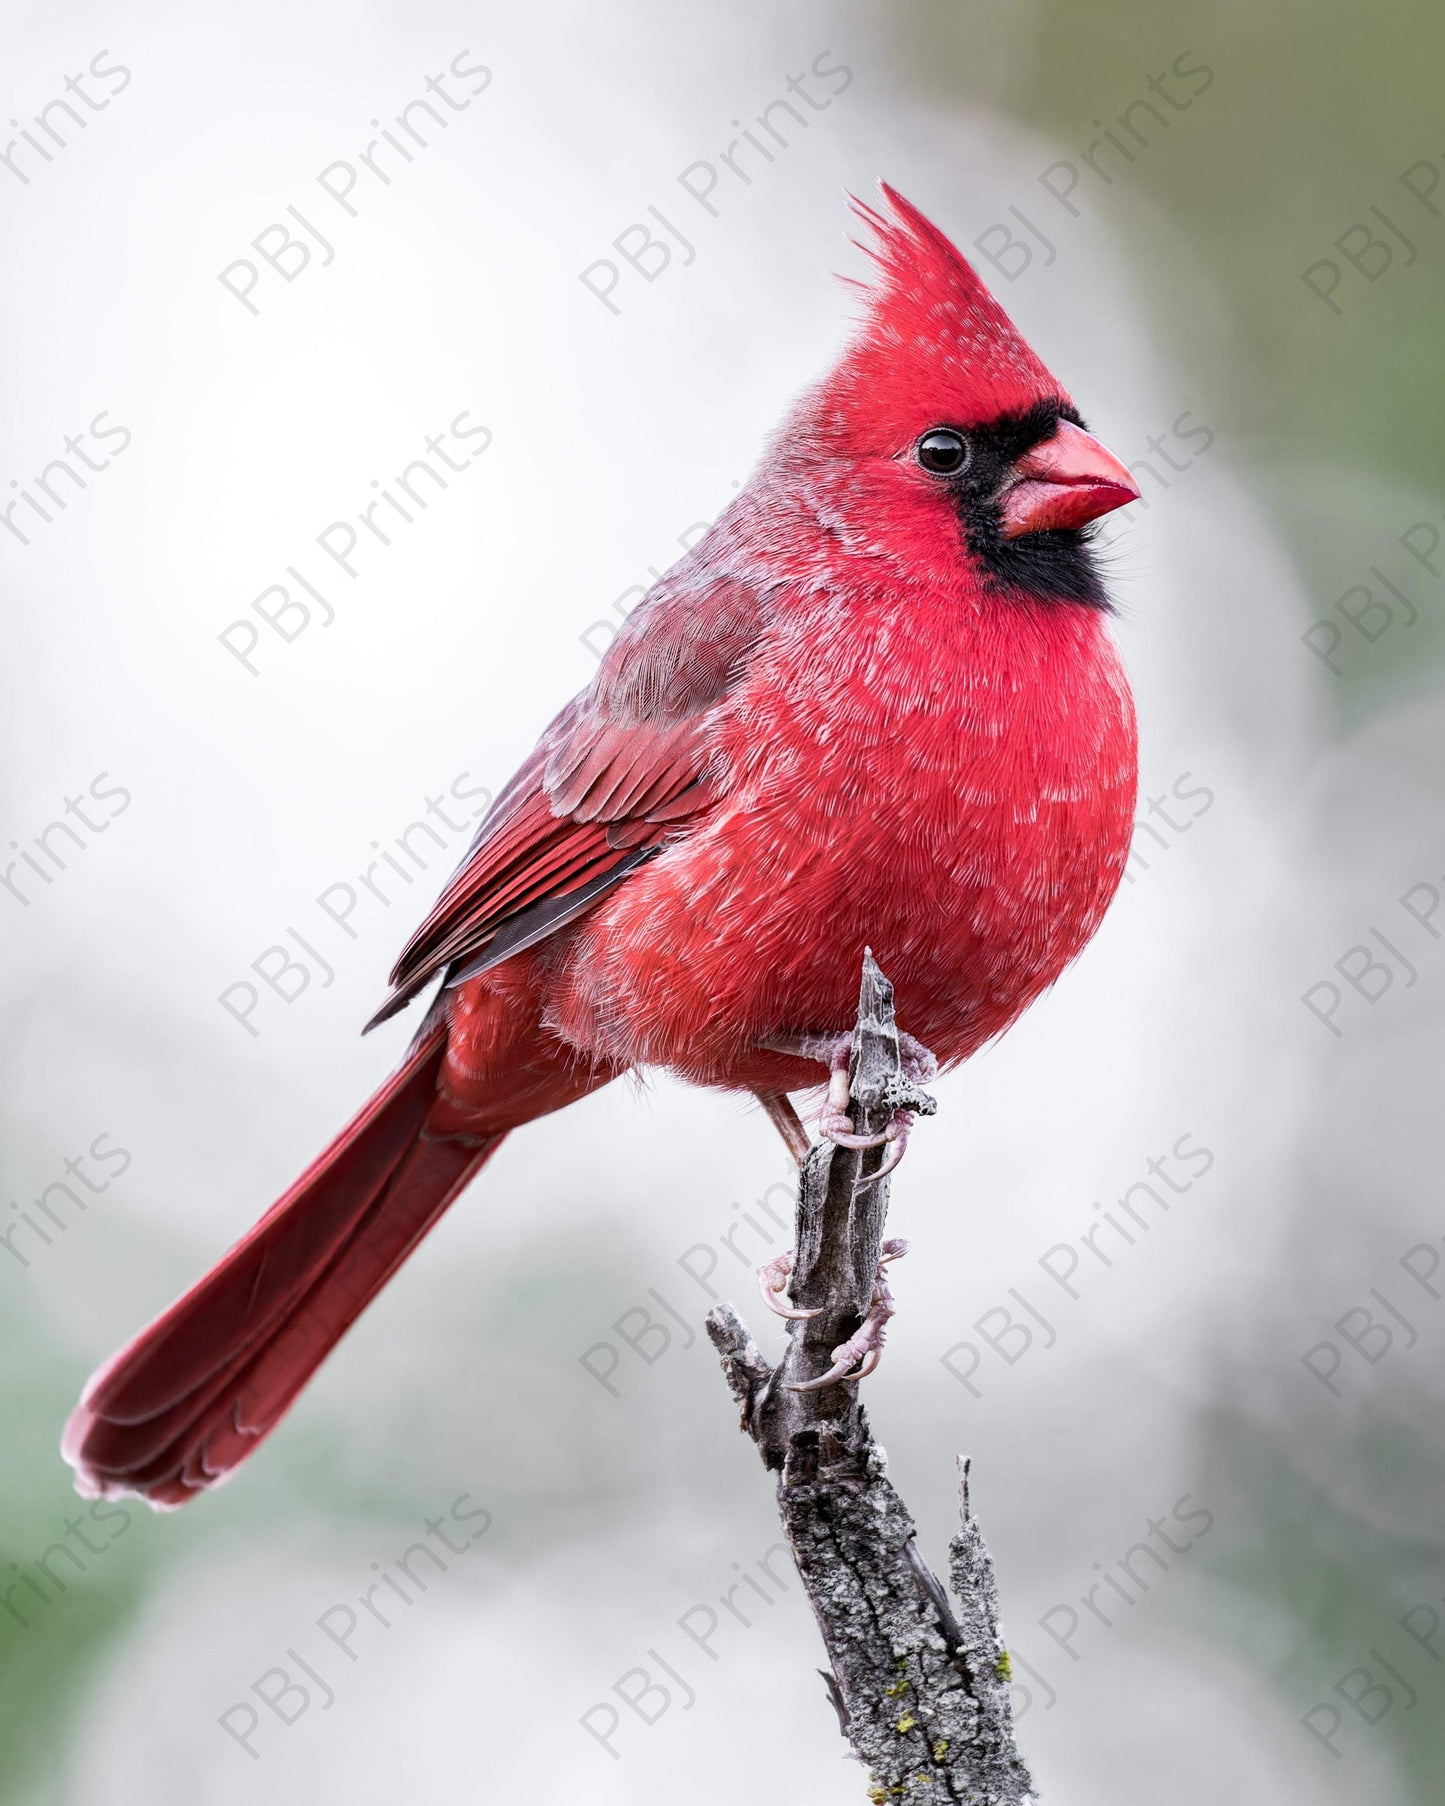 Cardinal's Majesty - Artist by Justin Rice - New Arrivals